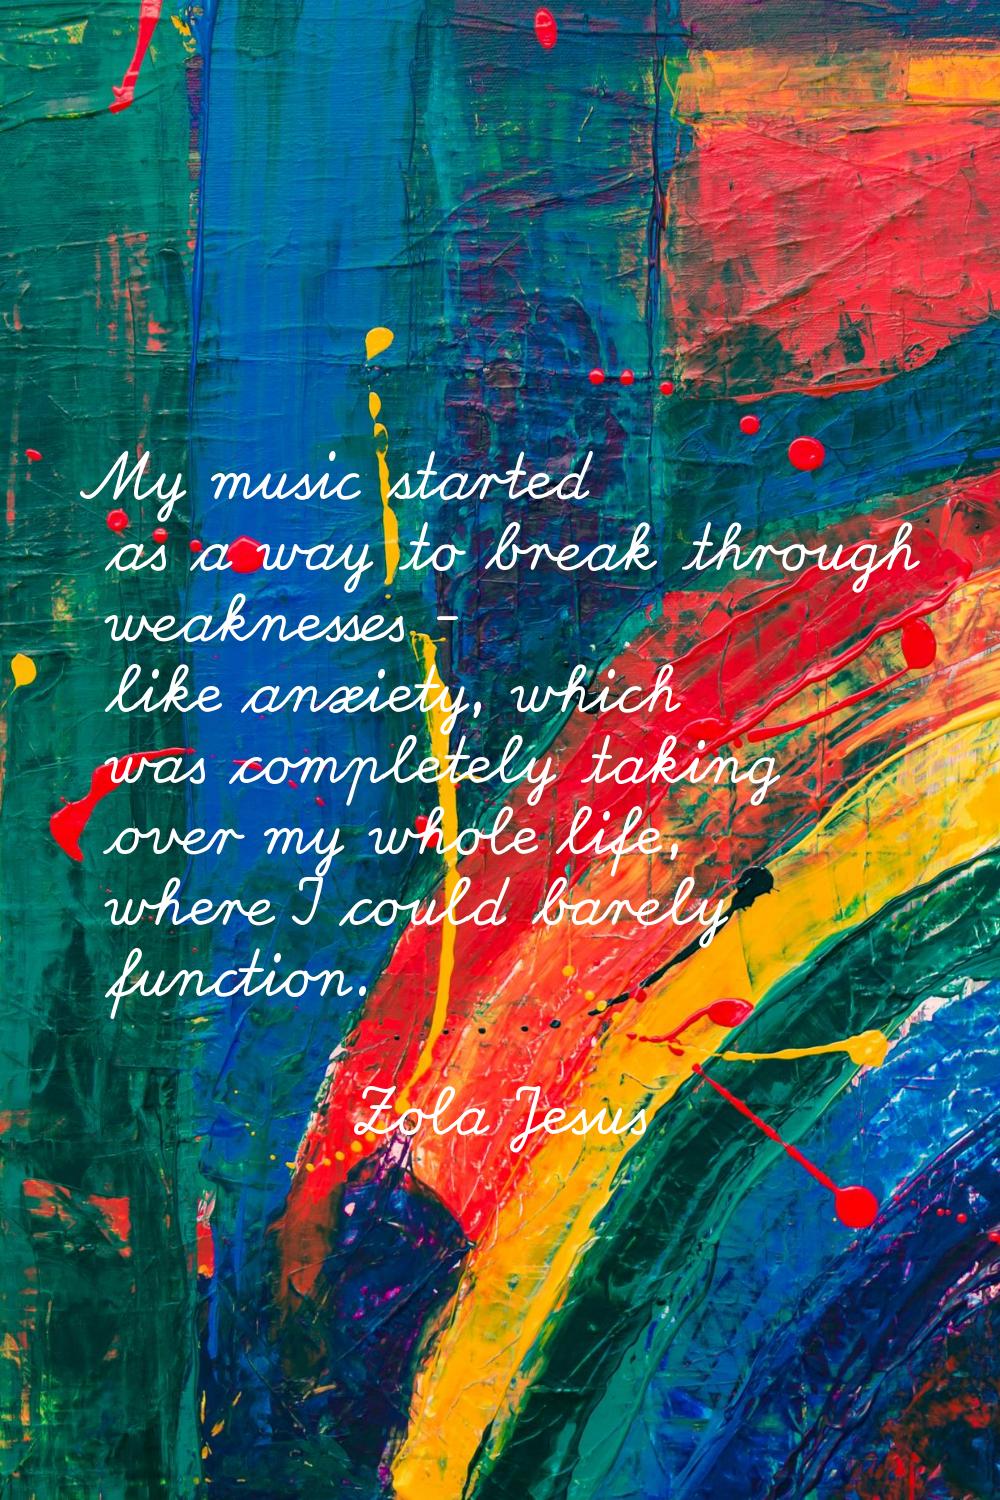 My music started as a way to break through weaknesses - like anxiety, which was completely taking o